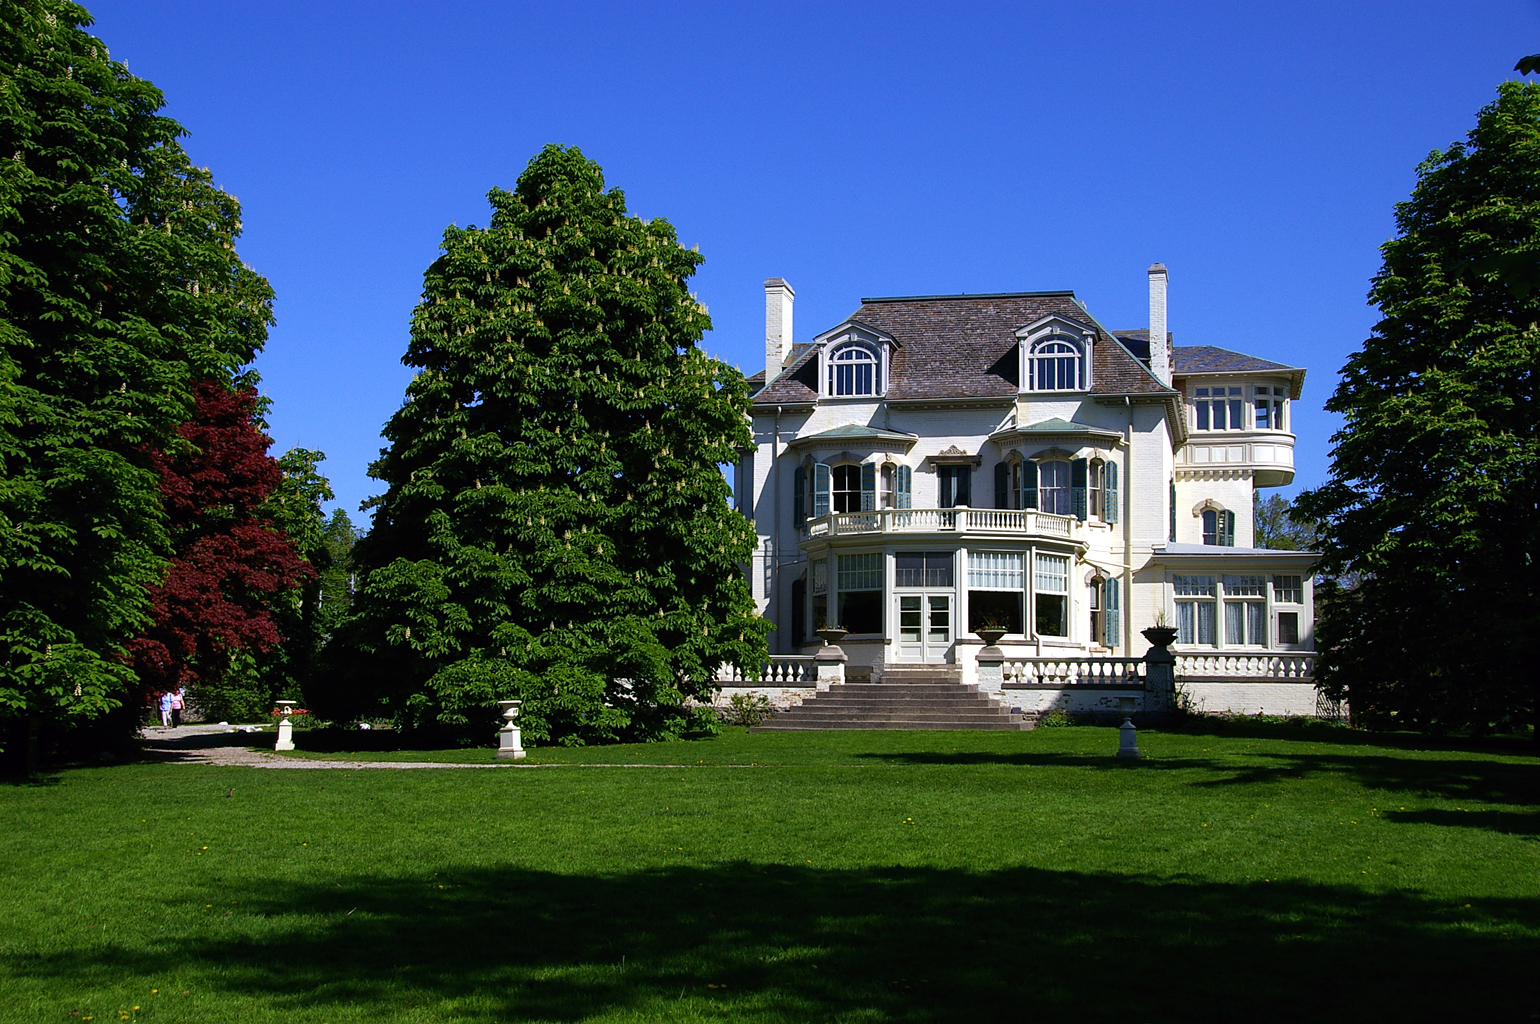 Spadina House in Toronto, a giant mansion with tall trees in foreground.